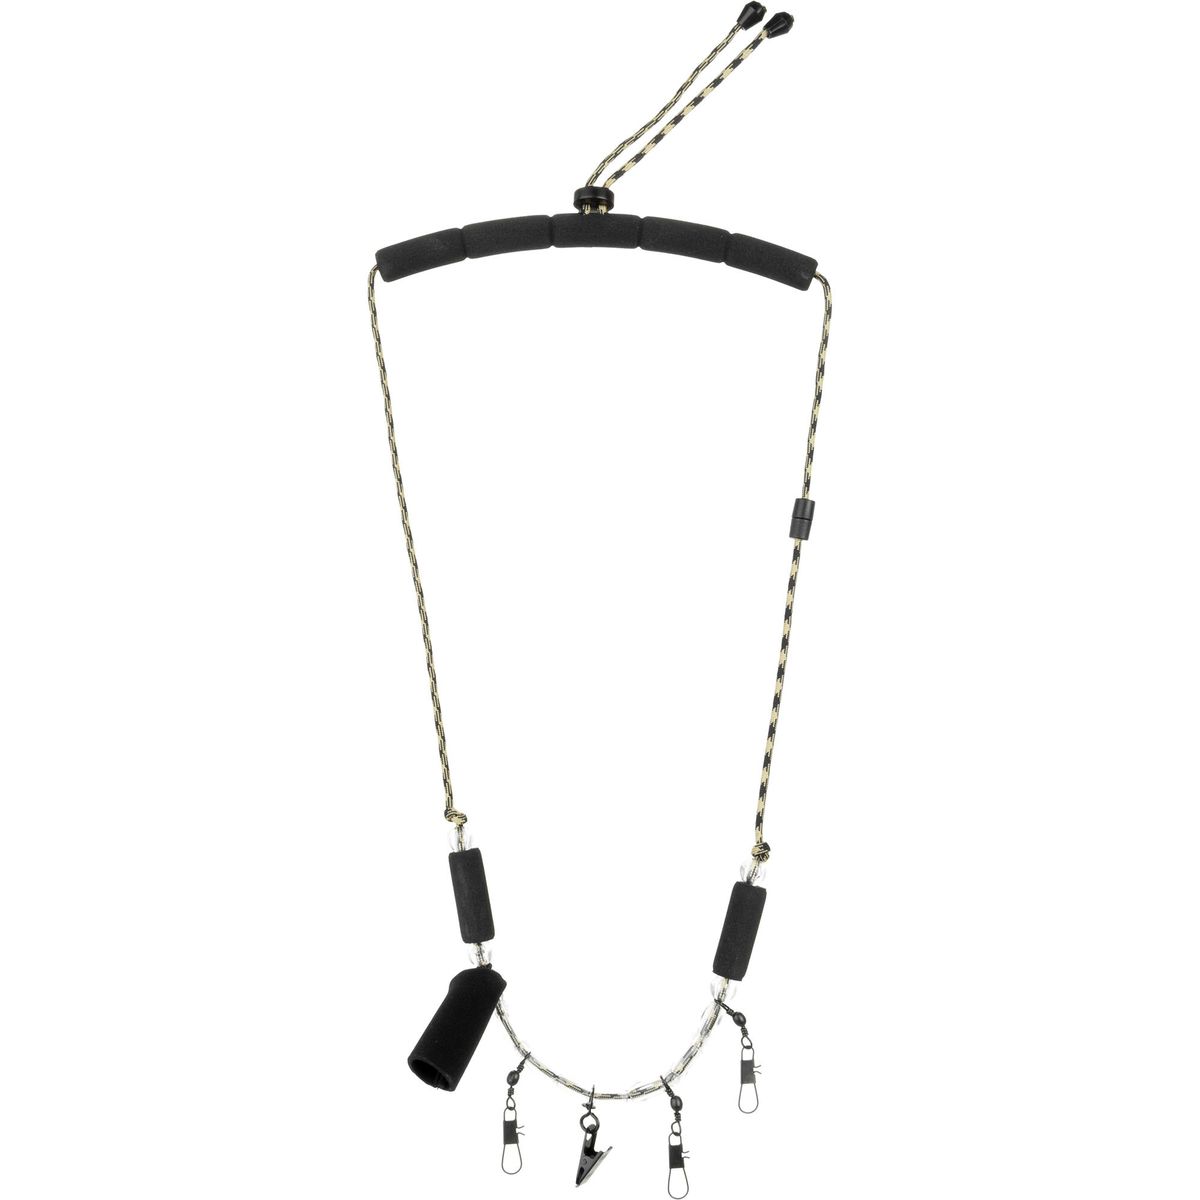 Angler's Accessories Clearwater Lanyard